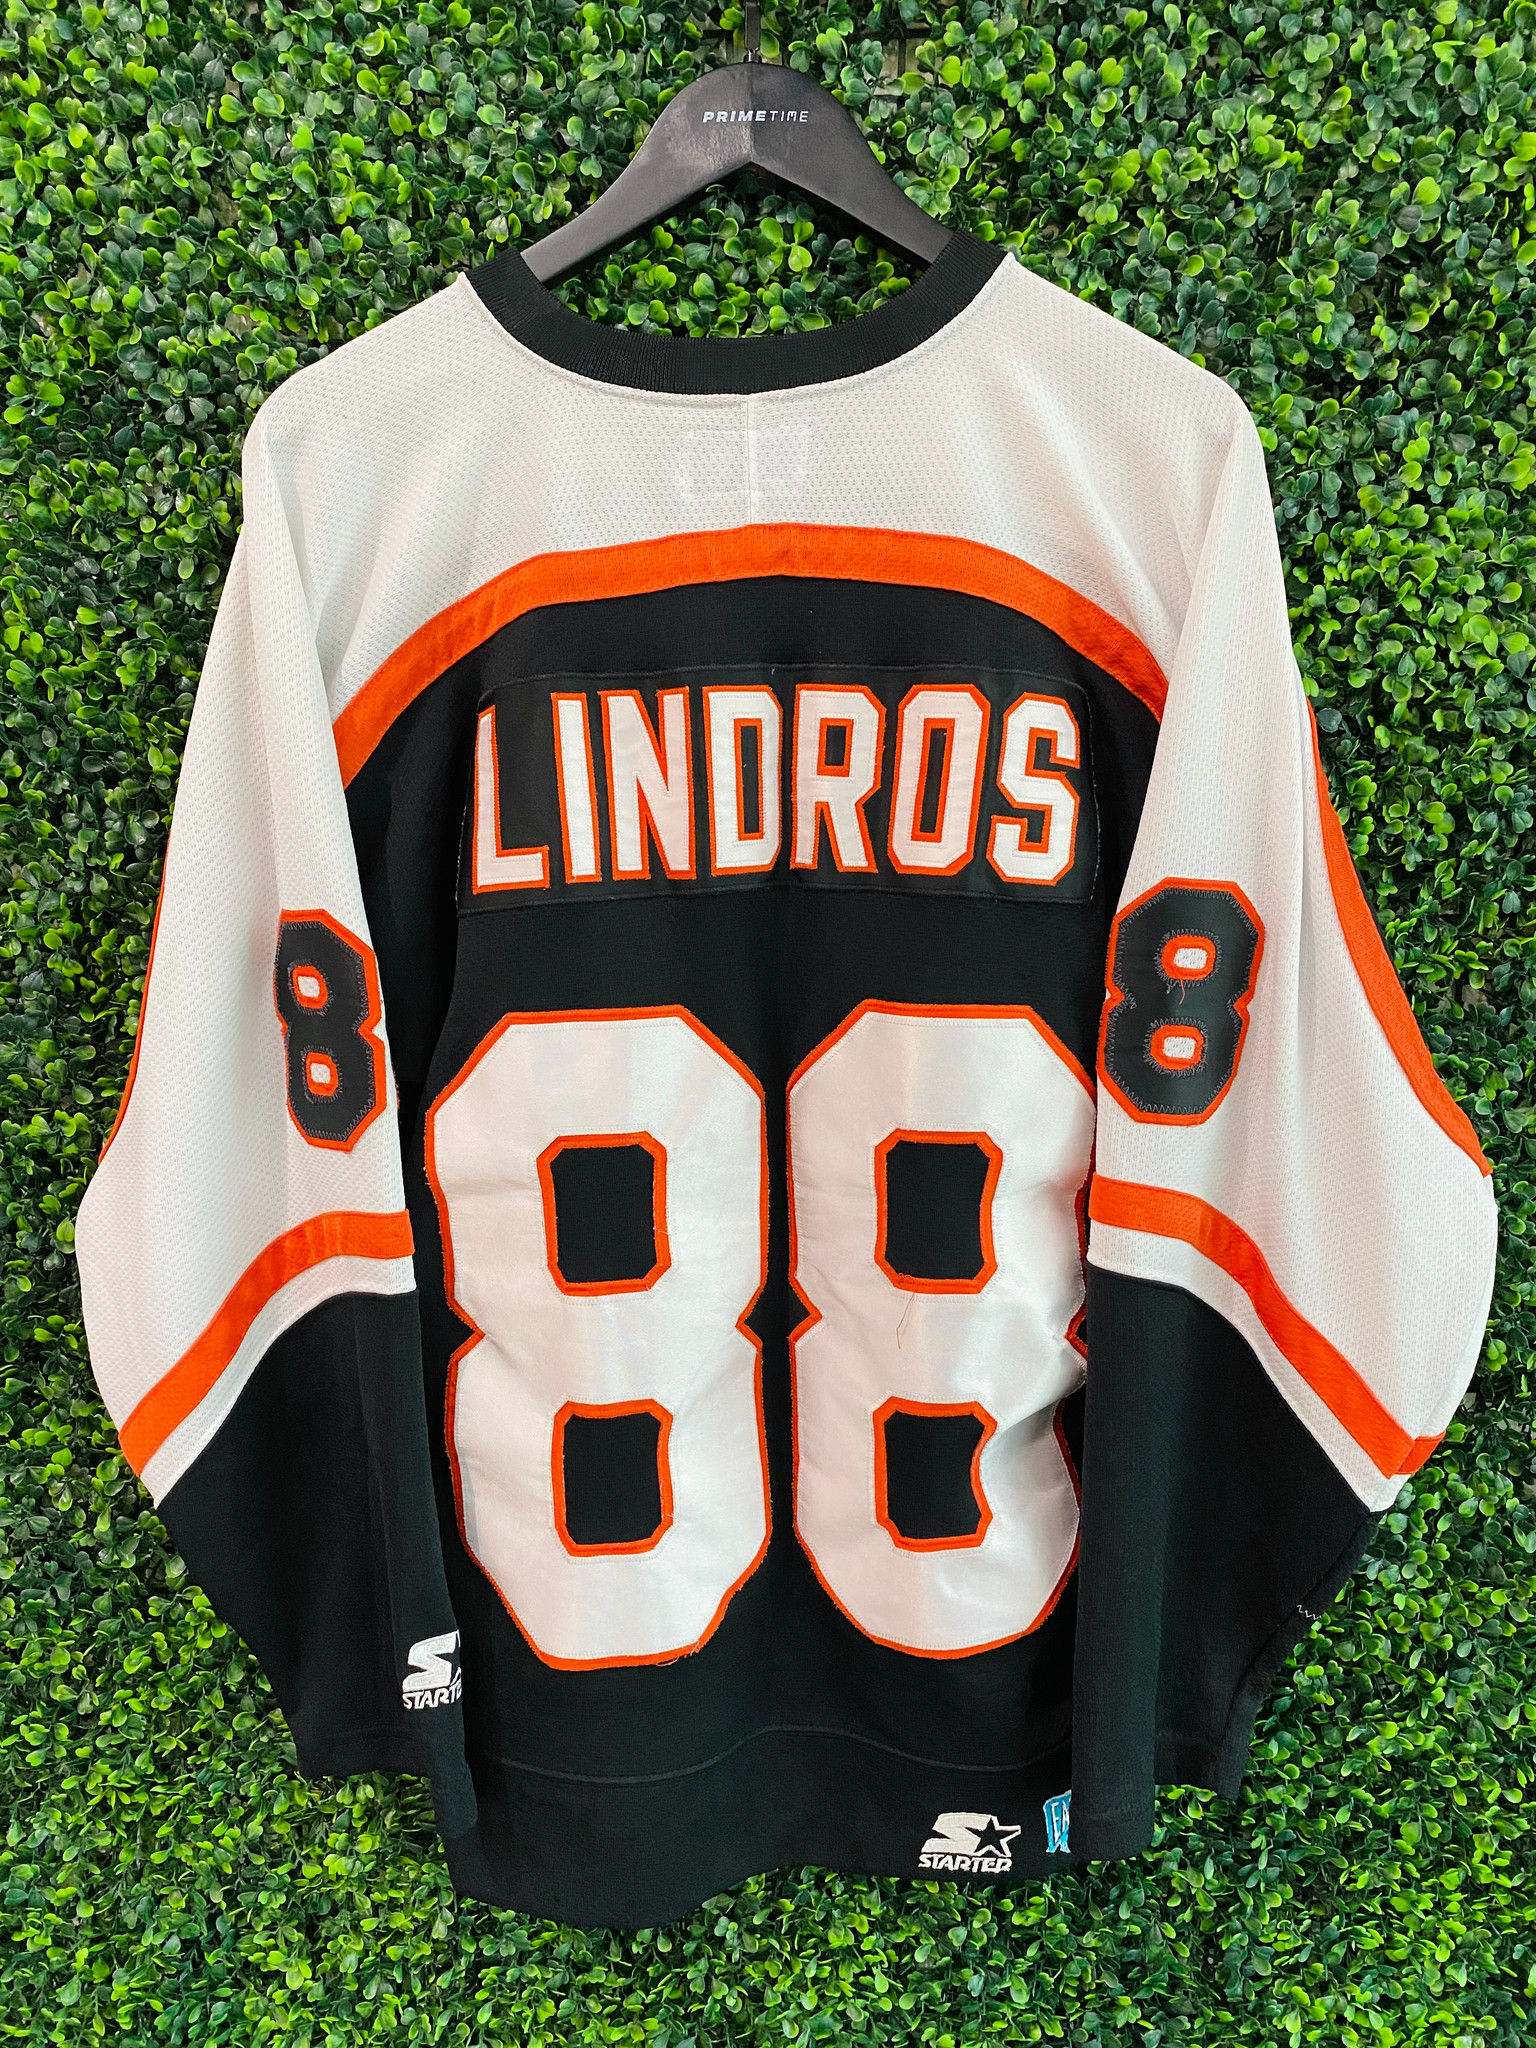 88 ERIC LINDROS Philadelphia Flyers NHL Centre White Throwback Jersey